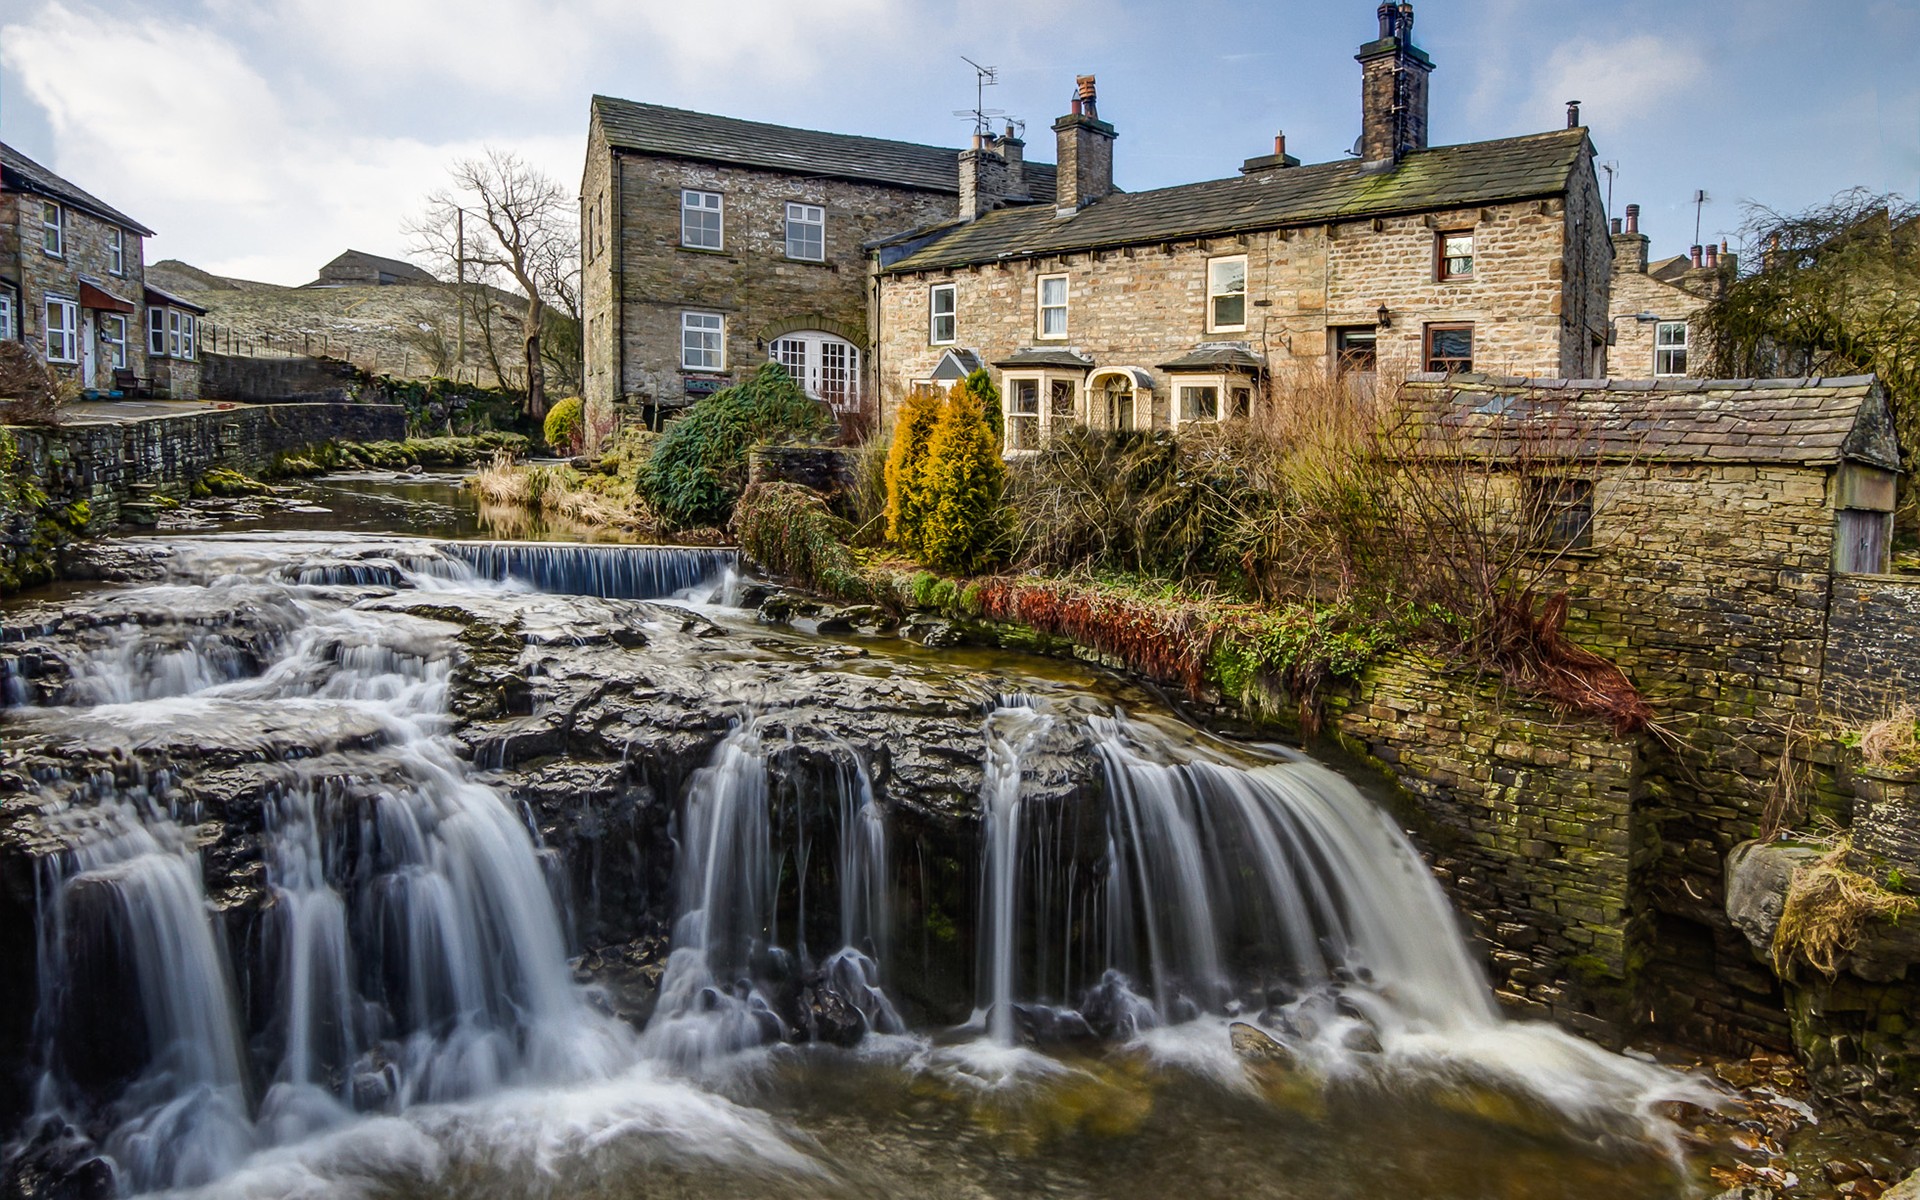 nature, Landscape, Waterfall, Water, Rock, Clouds, England, UK, Stream, Long exposure, Old building, House, Trees, Stones, Plants, Village, Hills Wallpaper